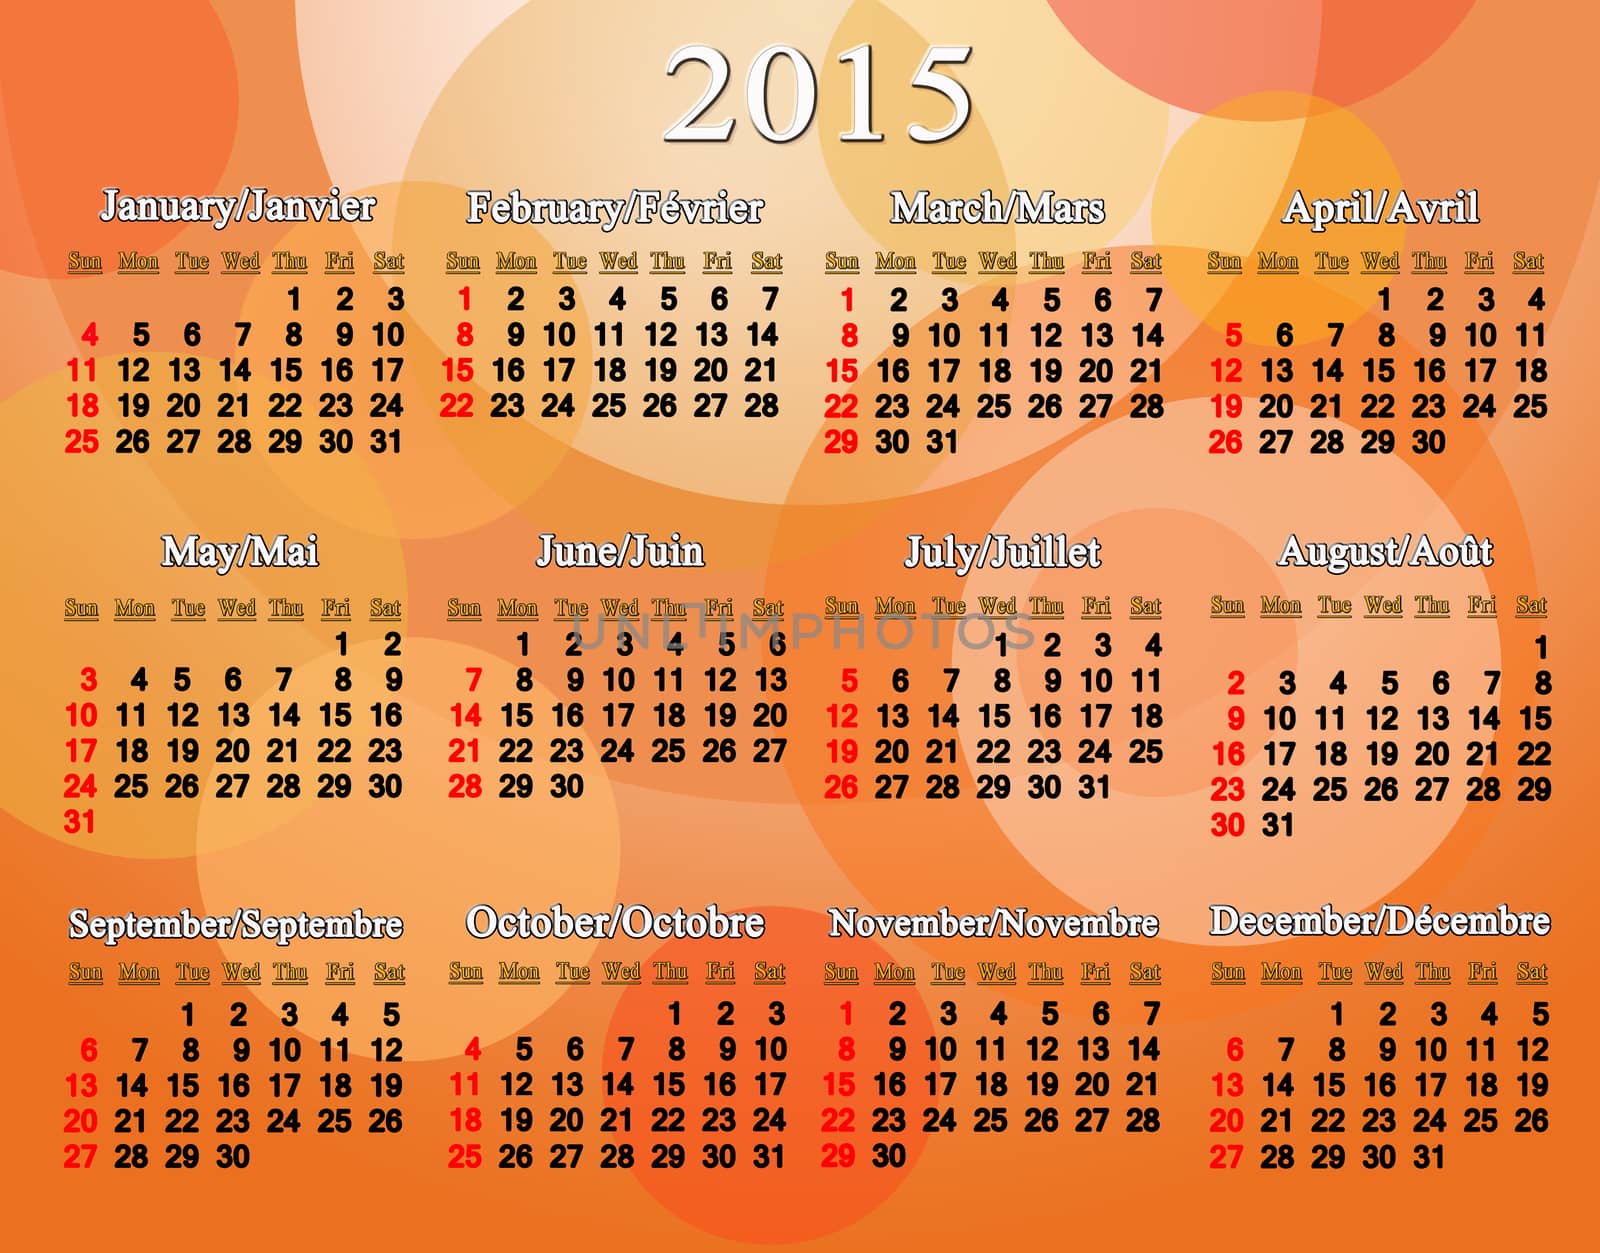 calendar for 2015 year in English and French on the orange background